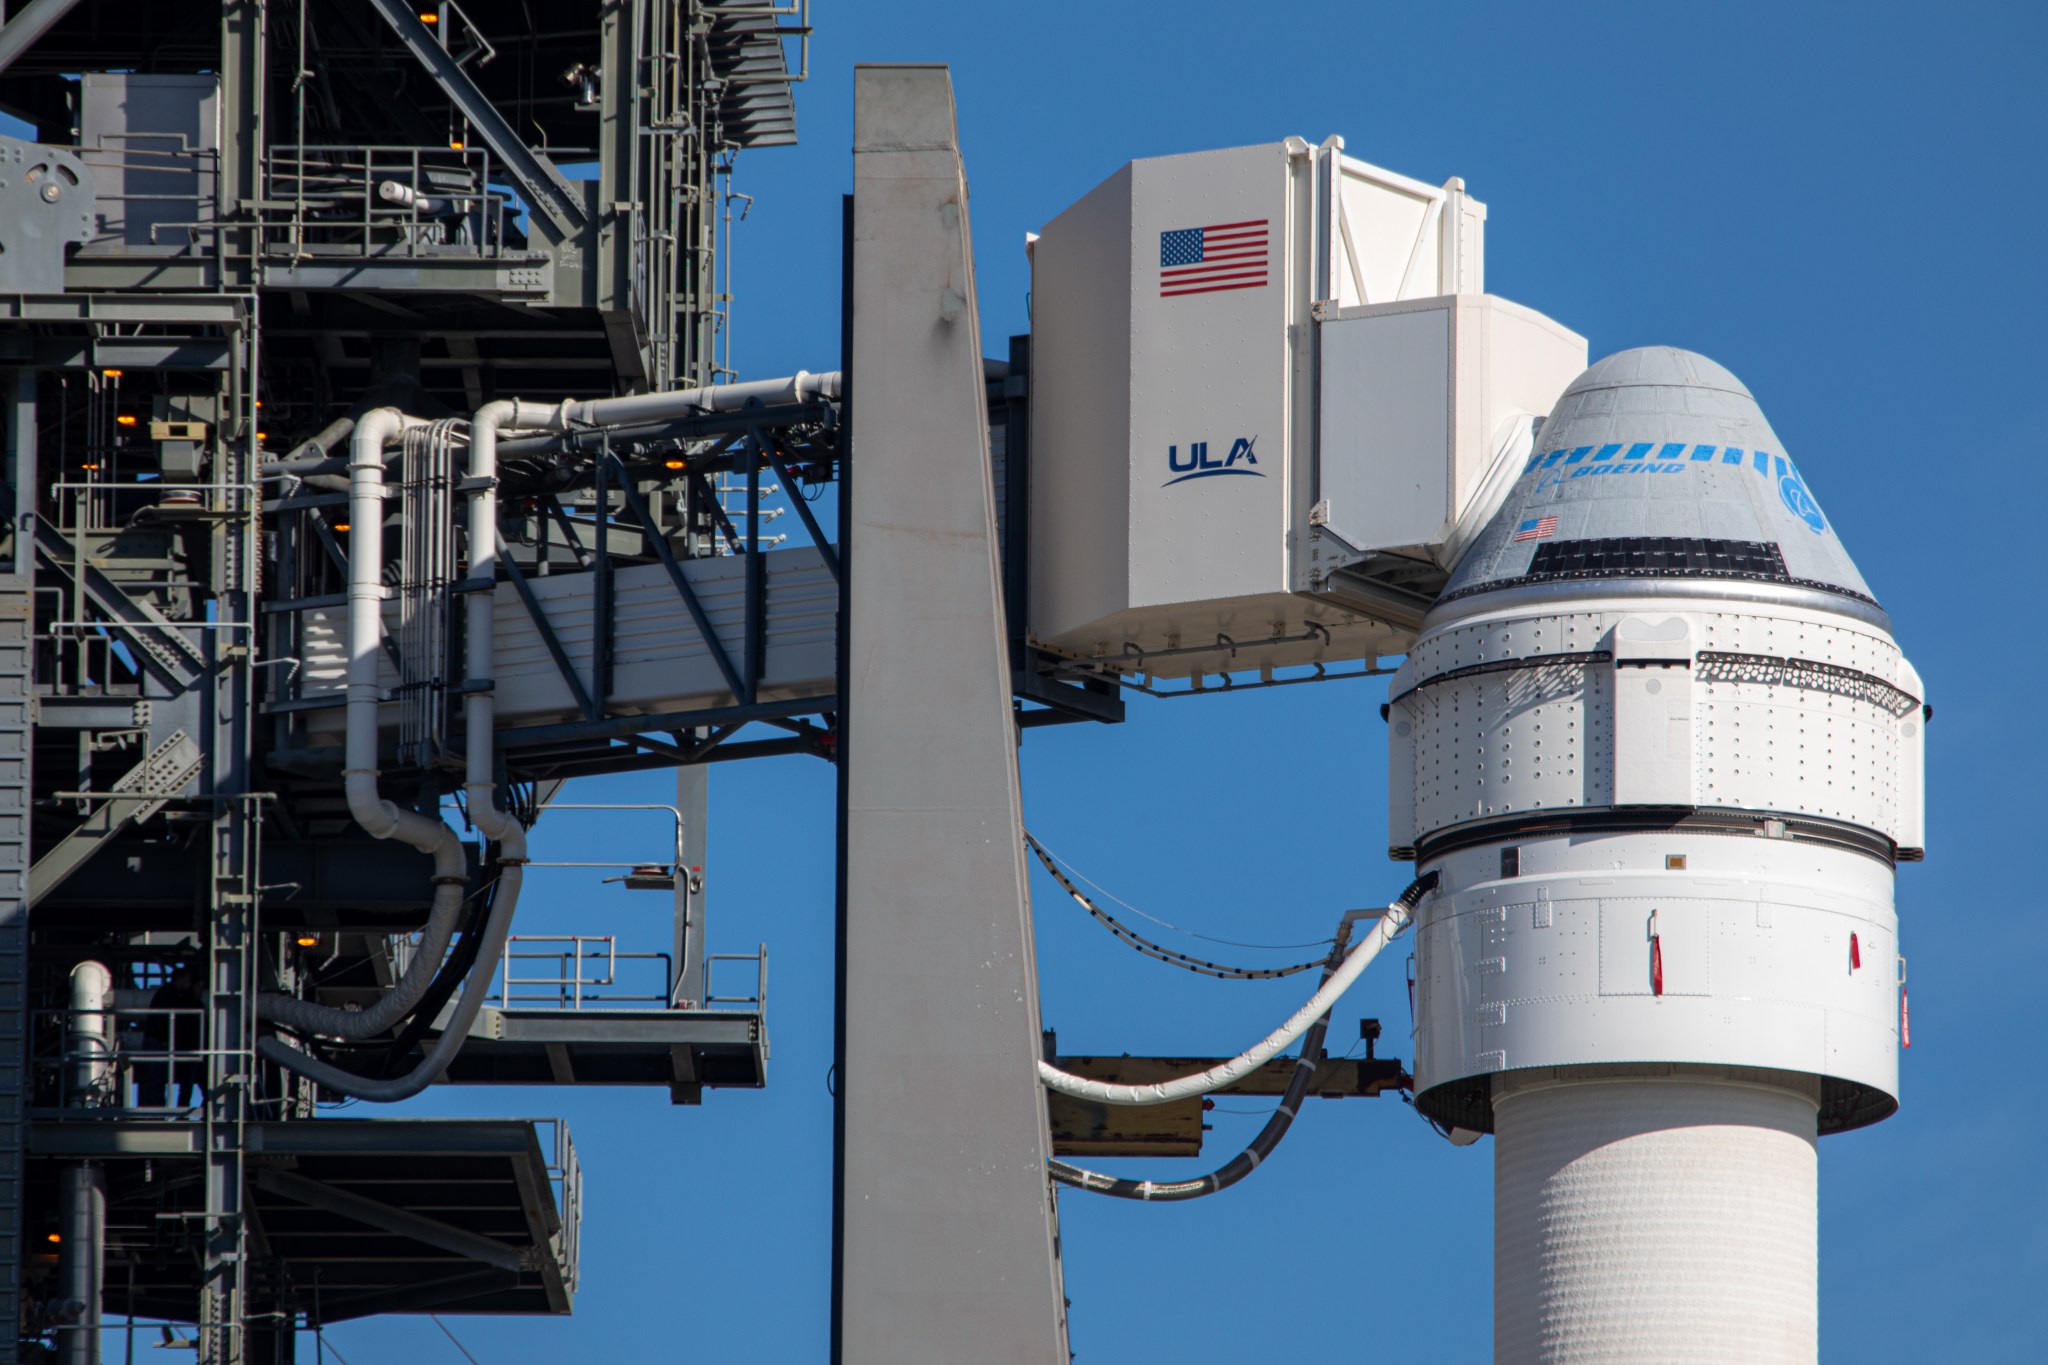 Boeing’s CST-100 Starliner spacecraft sits atop a United Launch Alliance Atlas V rocket at Cape Canaveral Air Force Station’s Space Launch Complex 41 in Florida.